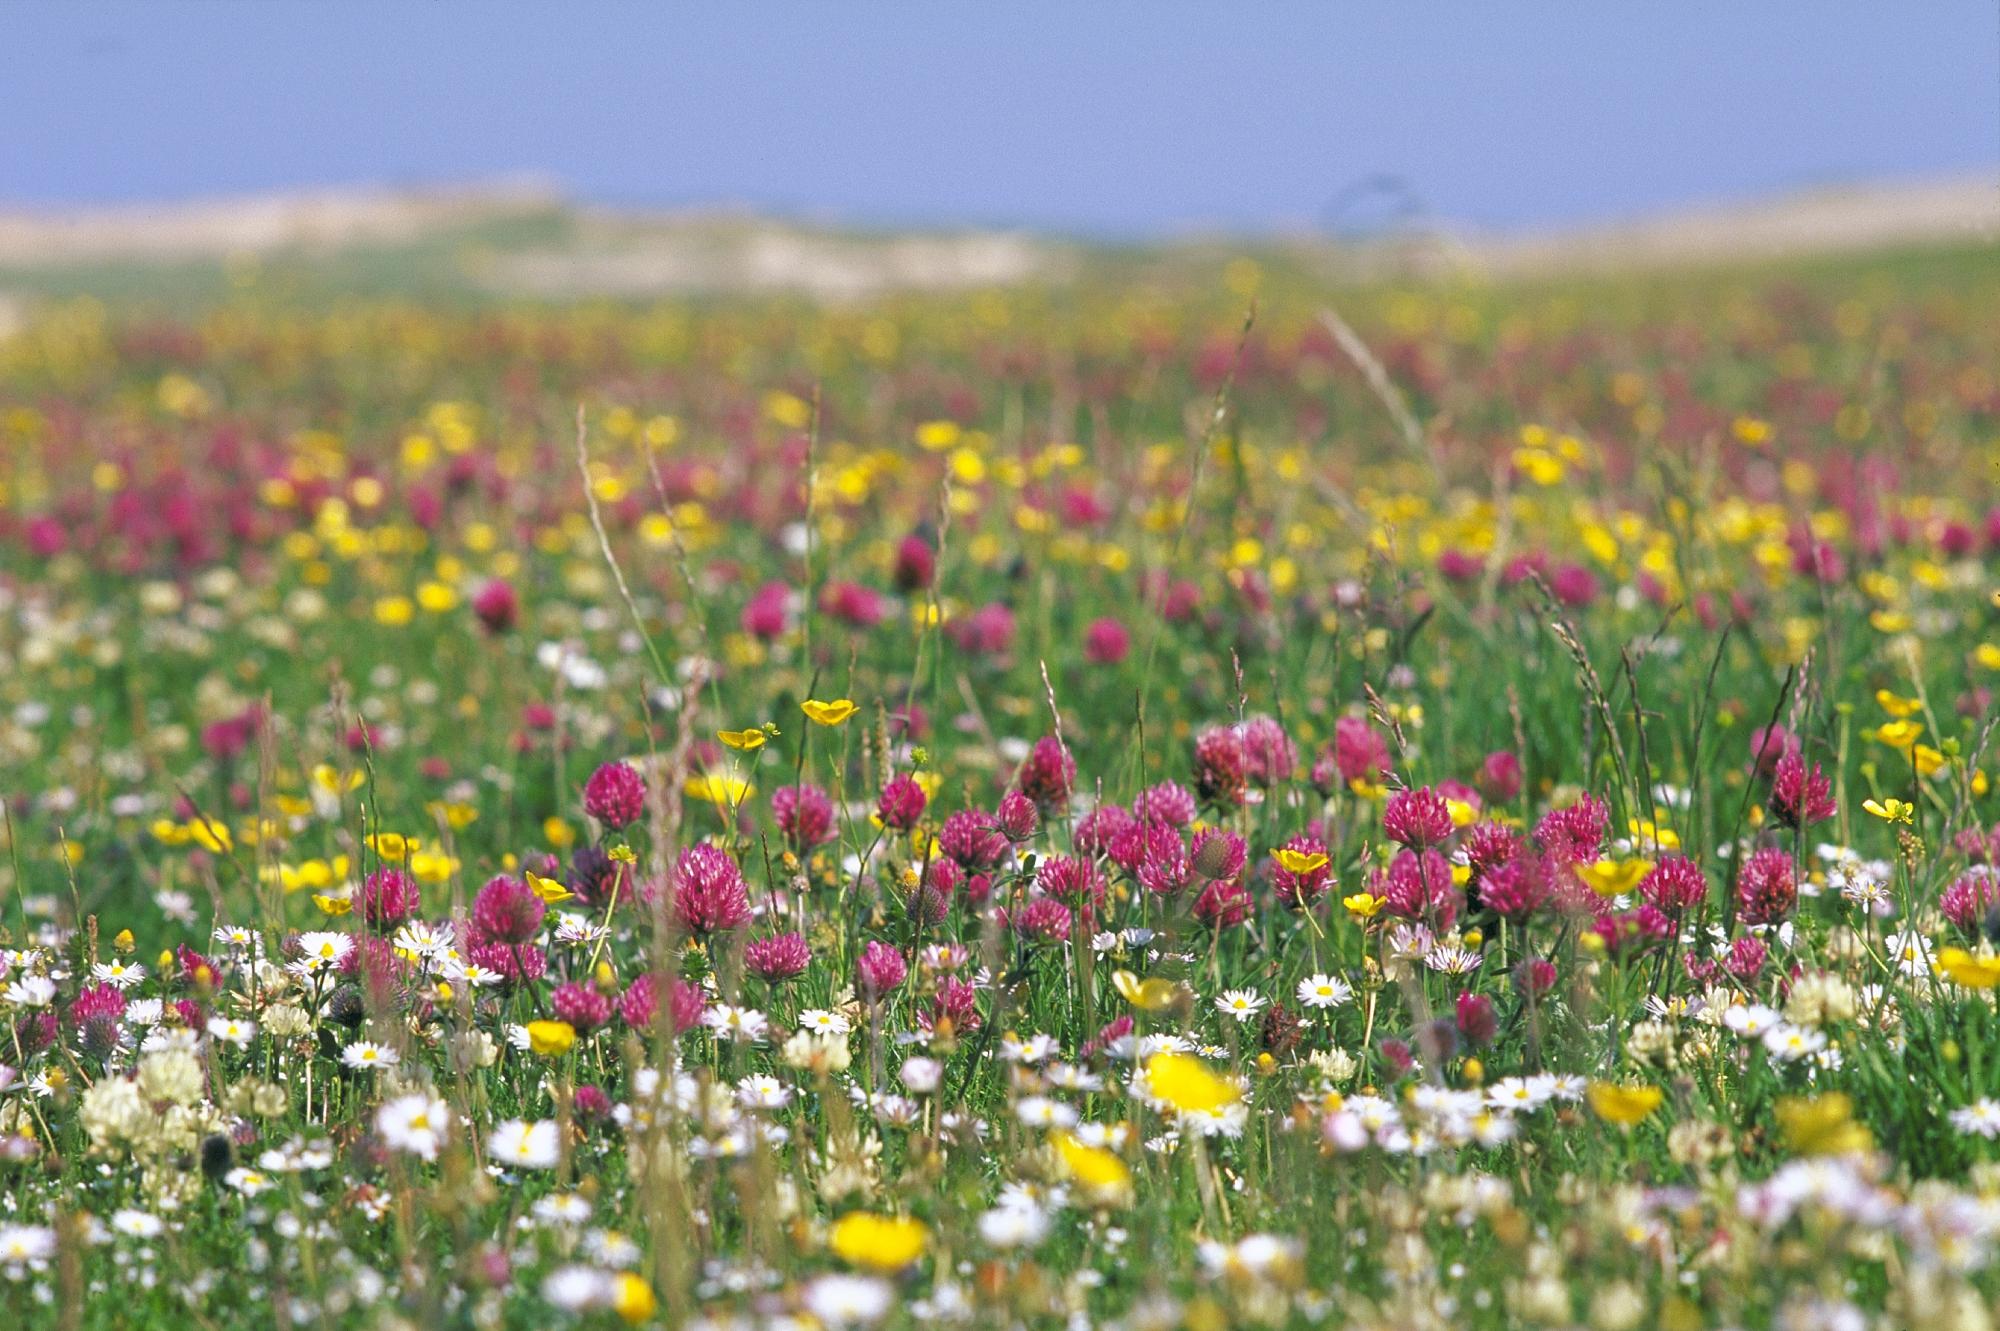 Machair flowers at Barvas, Isle of Lewis. ©Lorne Gill/SNH. For information on reproduction rights contact the Scottish Natural Heritage Image Library on Tel. 01738 444177 or www.nature.scot